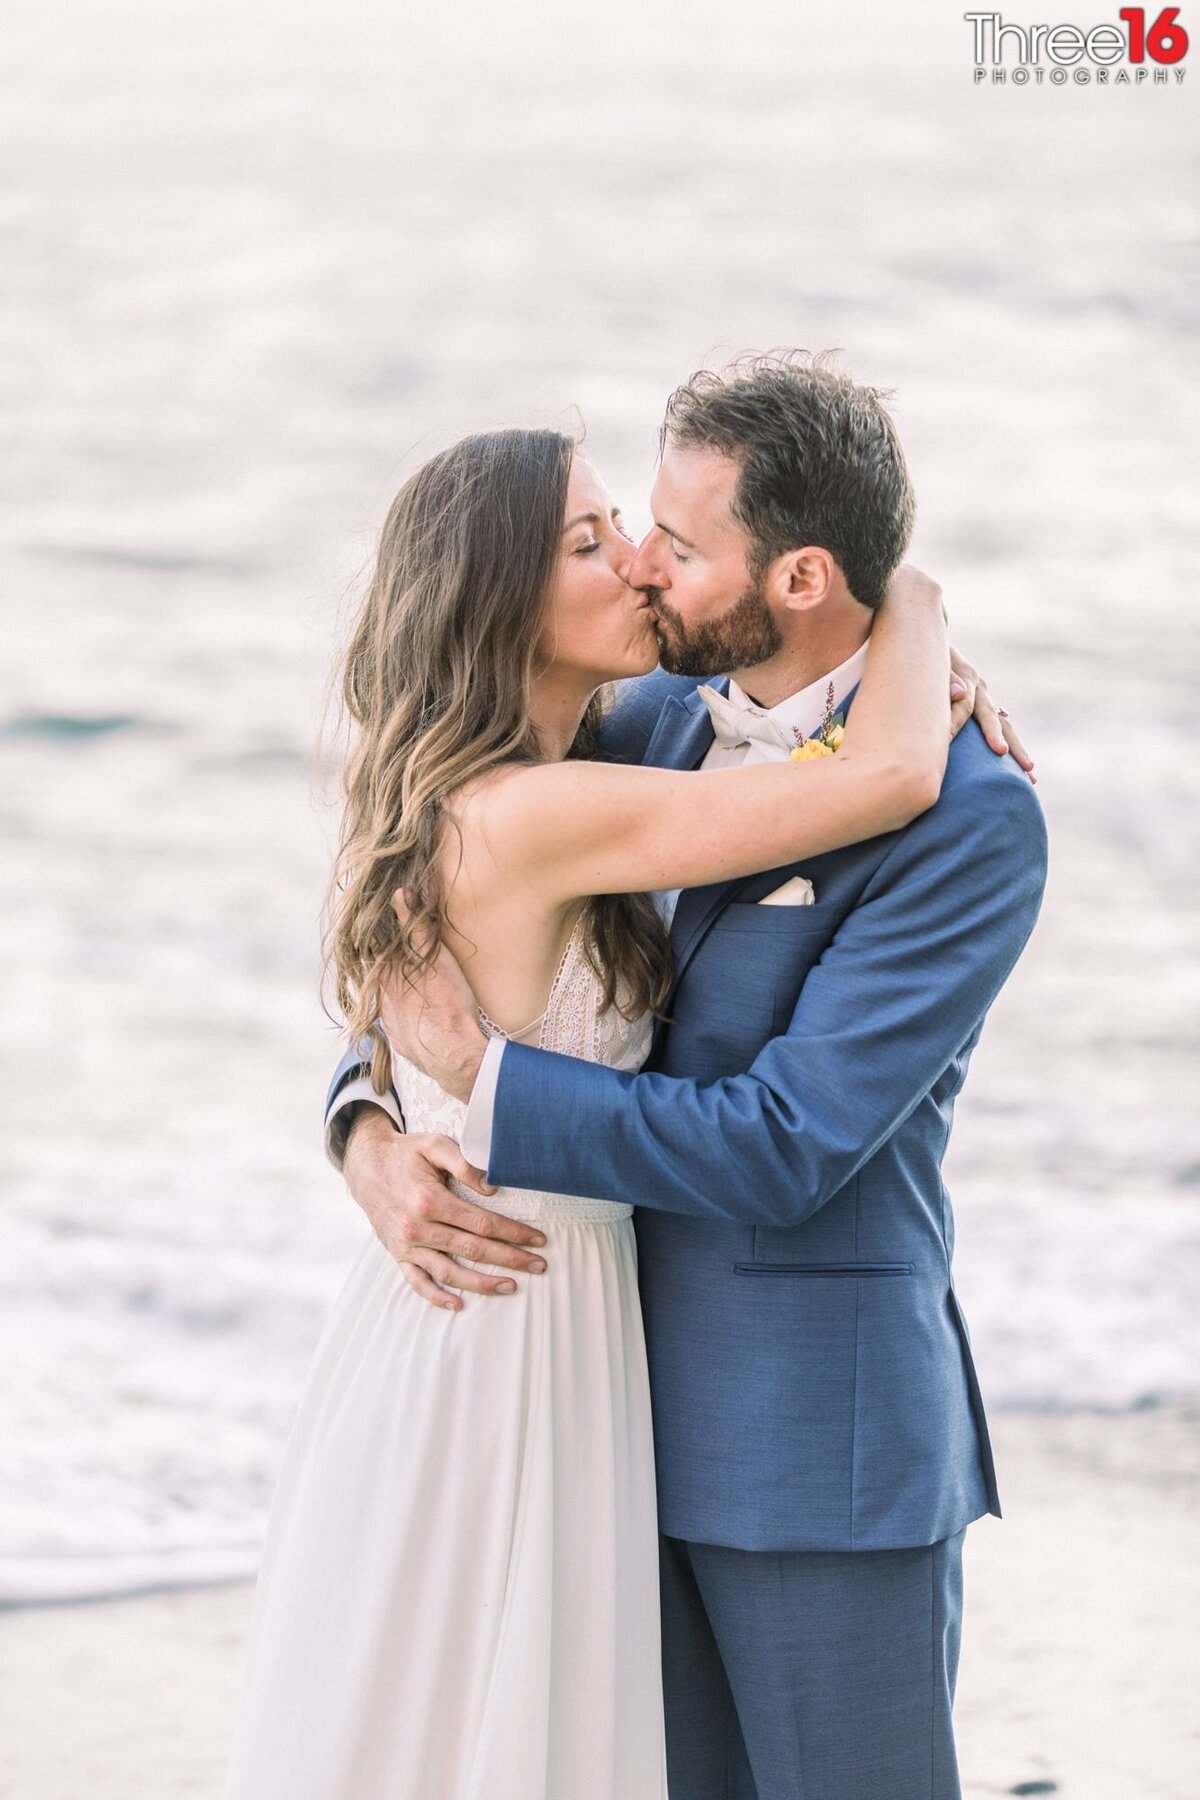 New husband and wife share a passionate kiss on the beach near the ocean waters